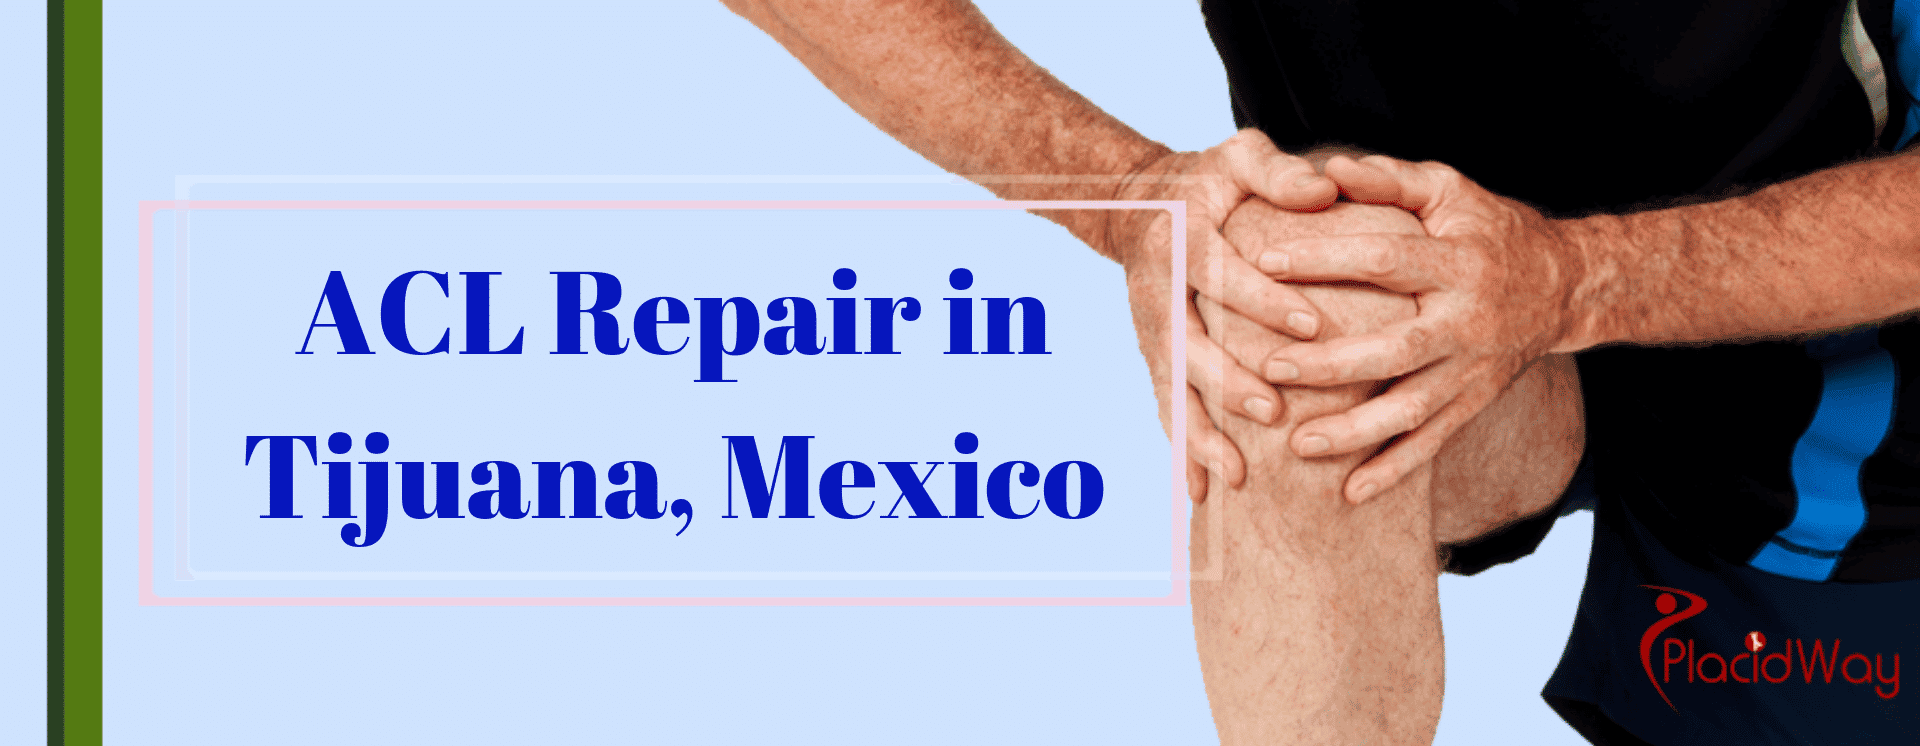 Best Package for ACL Repair in Tijuana, Mexico